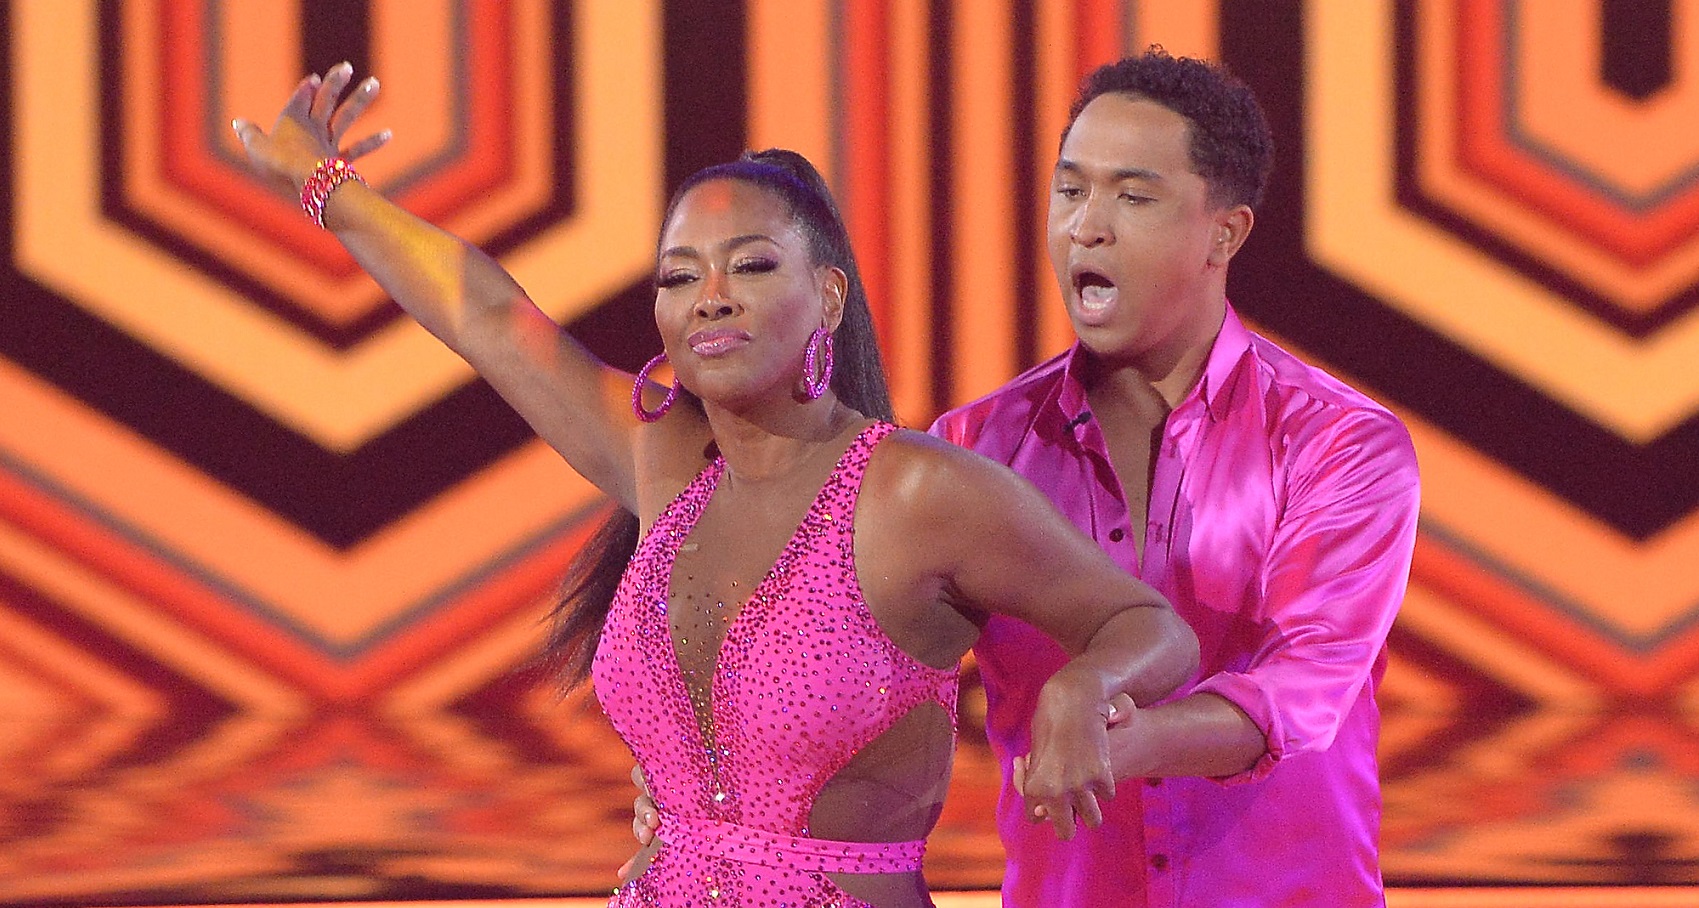 dancing with the stars this week focuses on kenya moore, pictured here in a pink dress